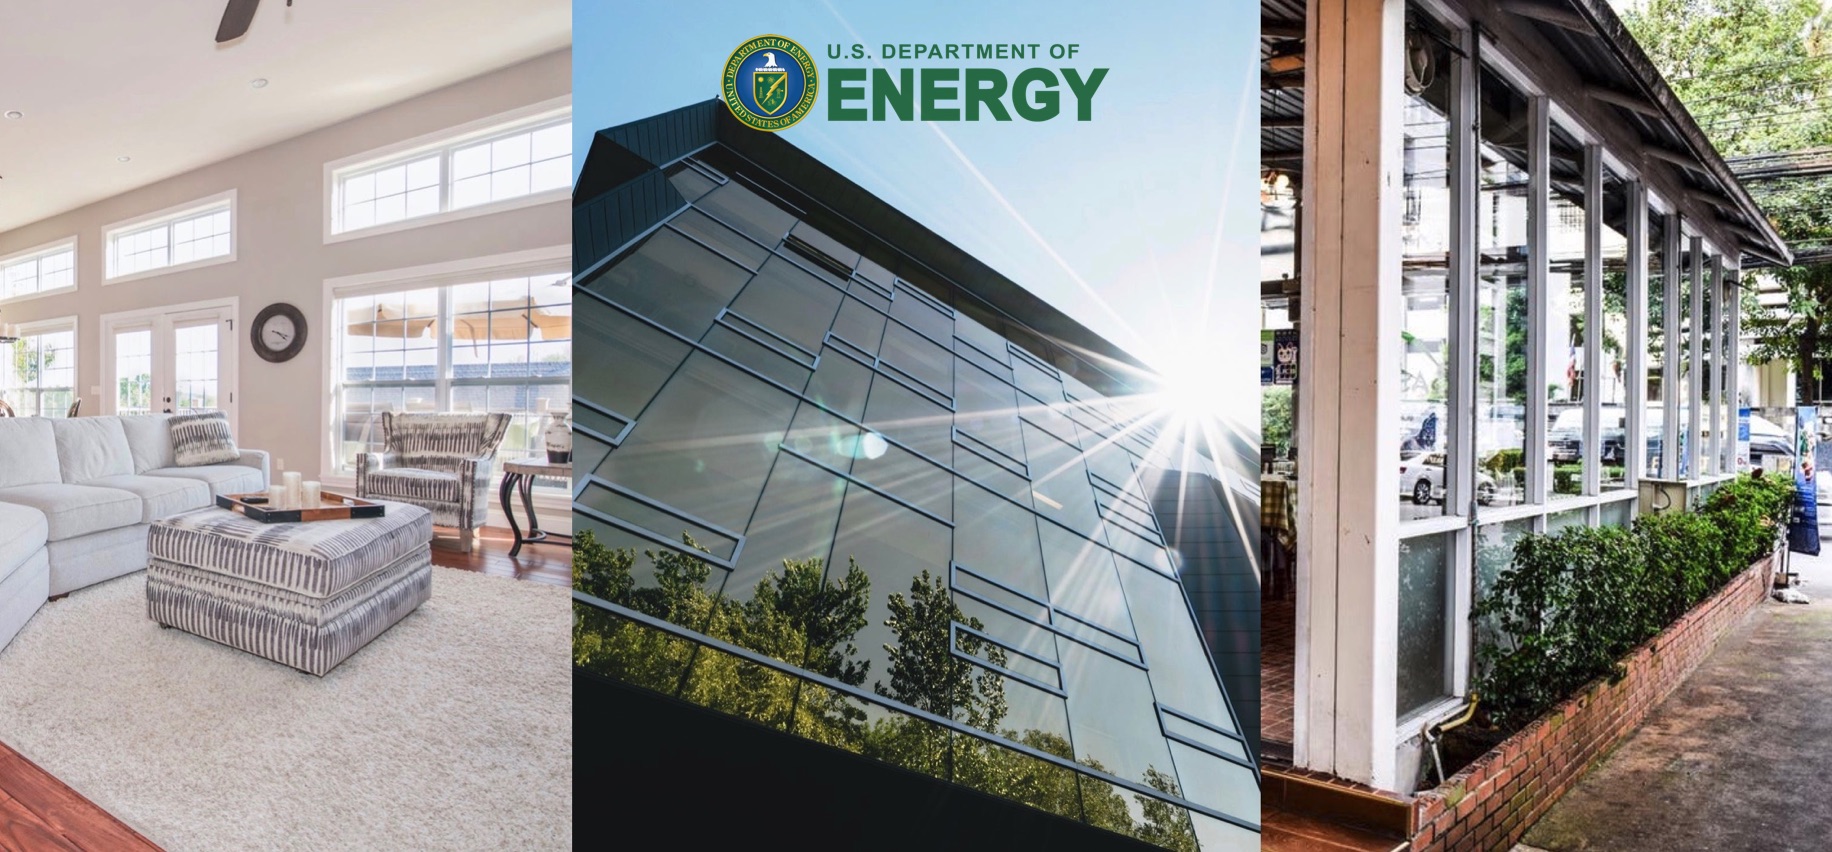 Department of Energy article entitled "Energy Efficient Window Attachments" where they discuss window film energy saving benefits. - Energy Saving Window Film in Atlanta, Georgia